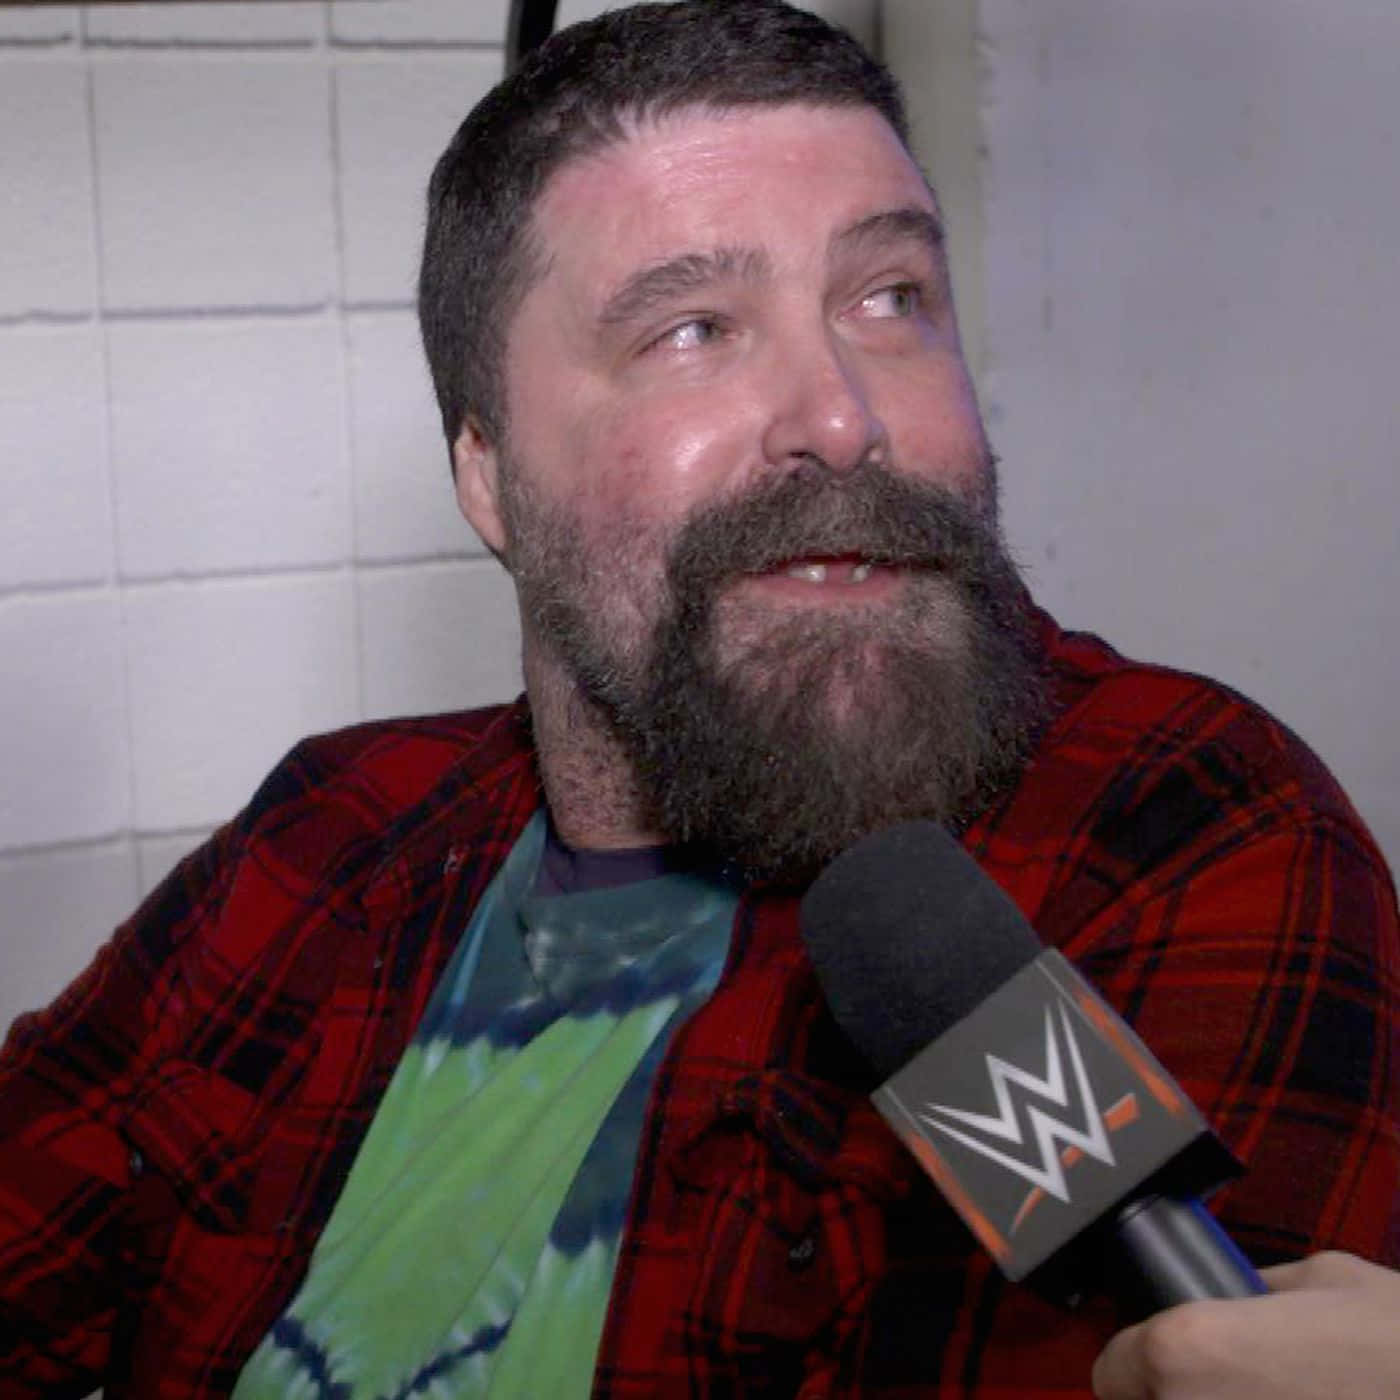 Wwe Hall Of Famer Mick Foley Wwe Raw Exclusive Interview Wallpaper